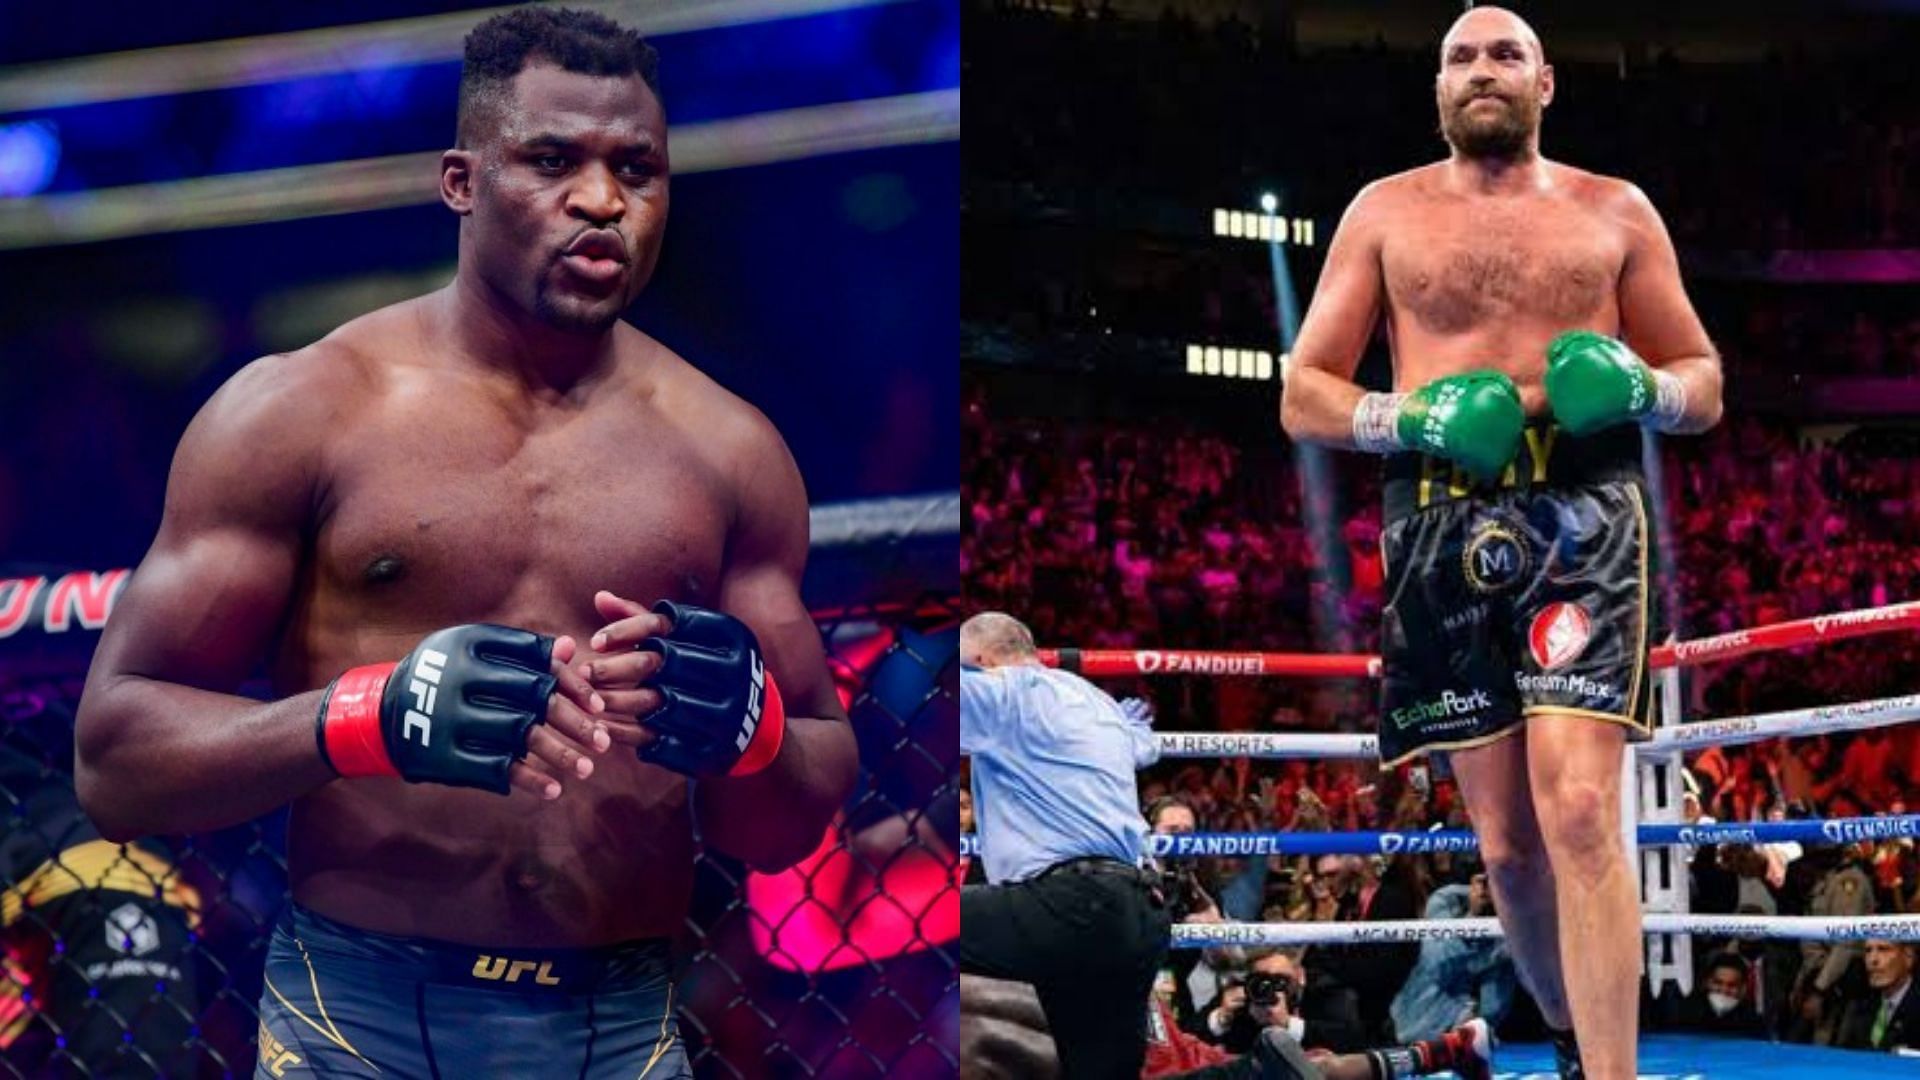 Could Francis Ngannou go on to face Tyson Fury in a boxing match?